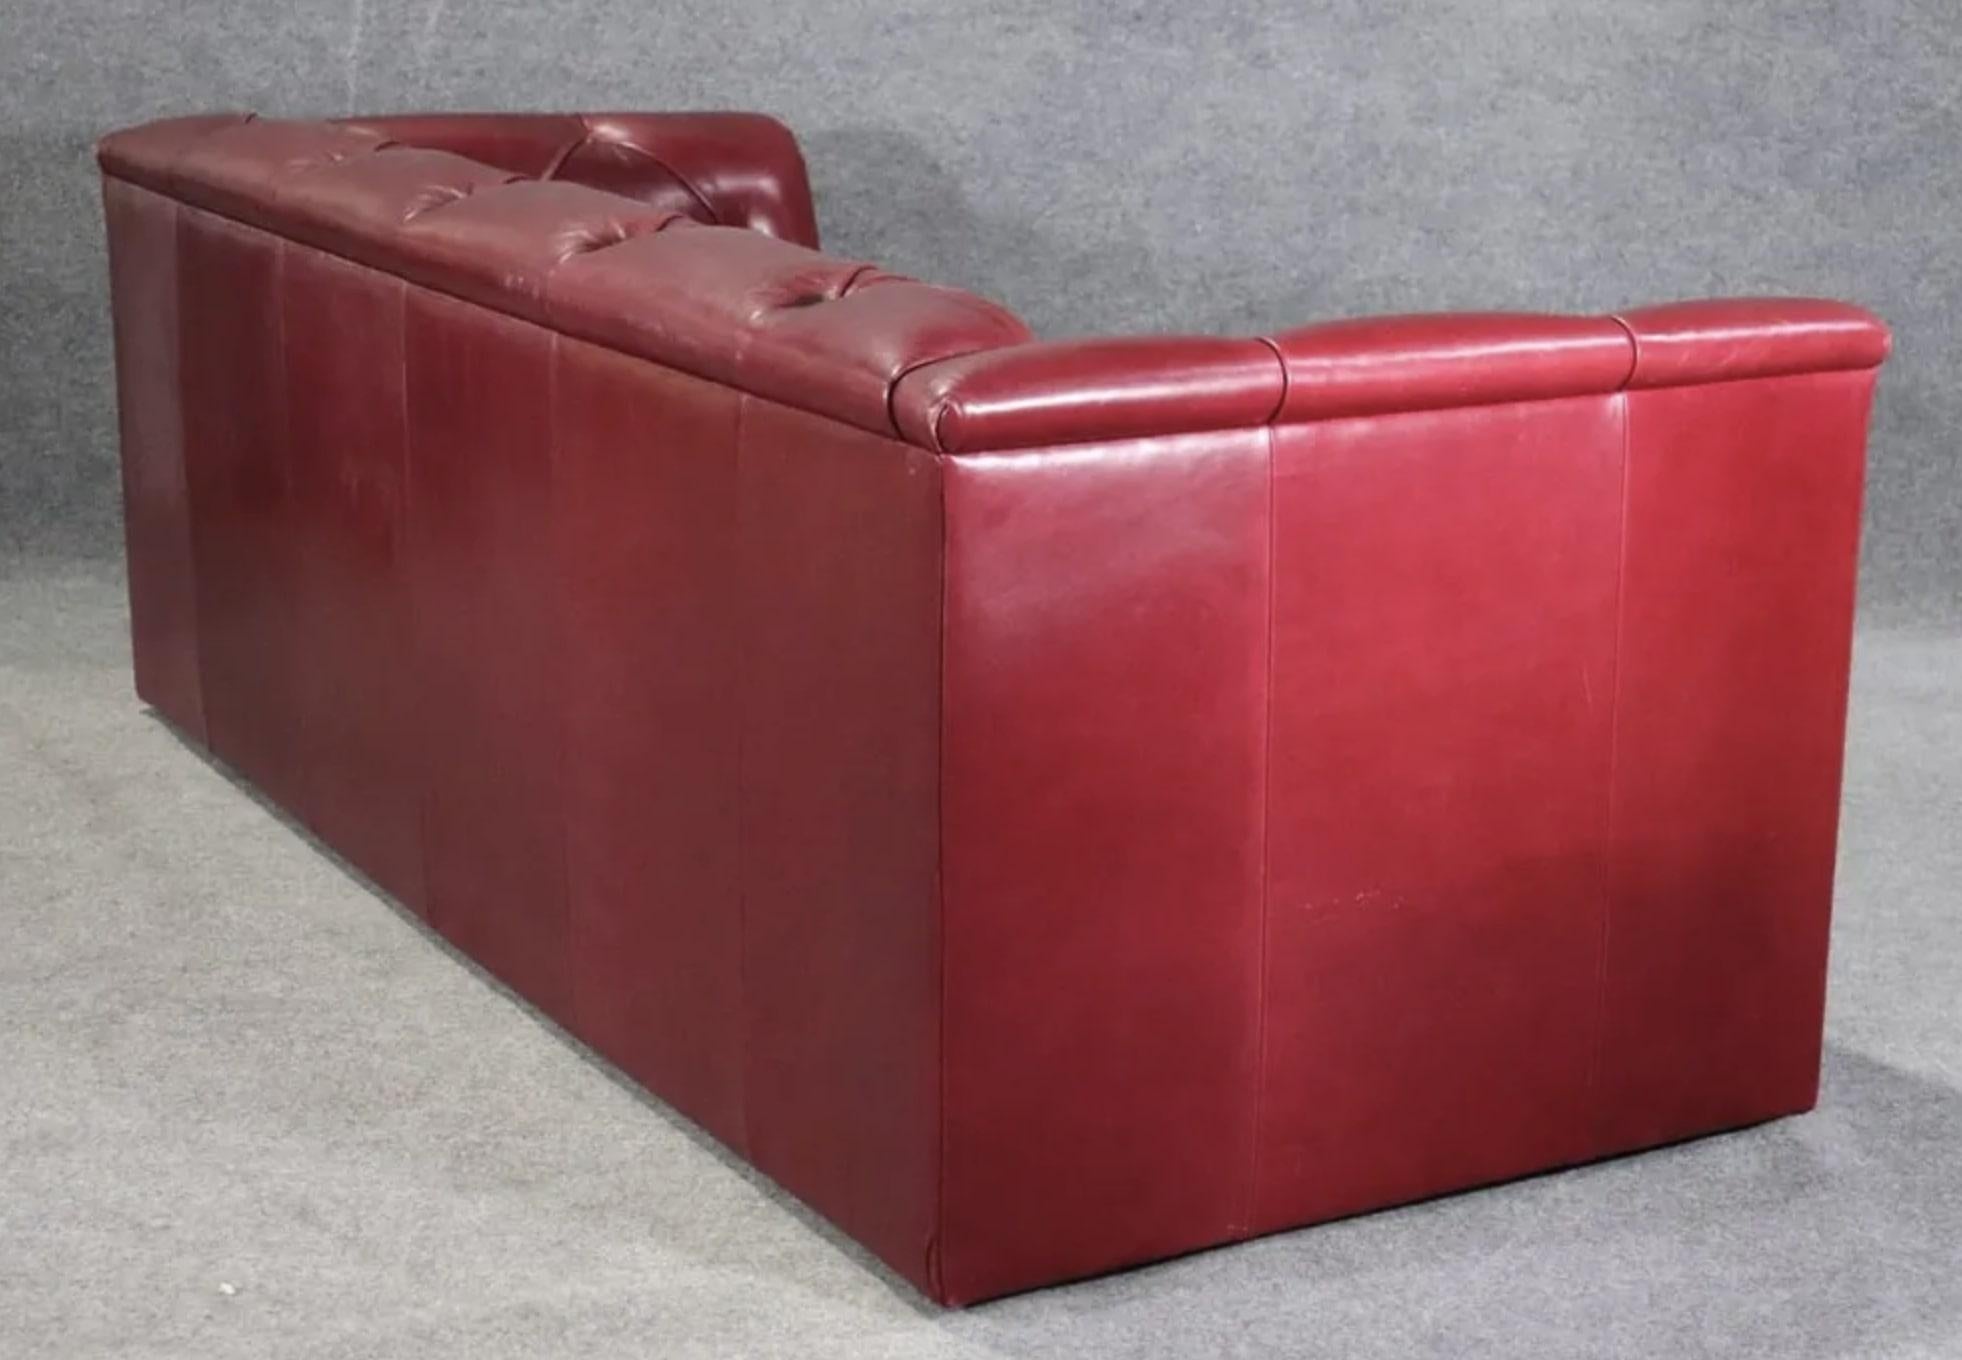 Tufted sofa by J. Robert Scott in maroon red leather. Seat goes down to the floor for a low profile.
Please confirm location NY or NJ